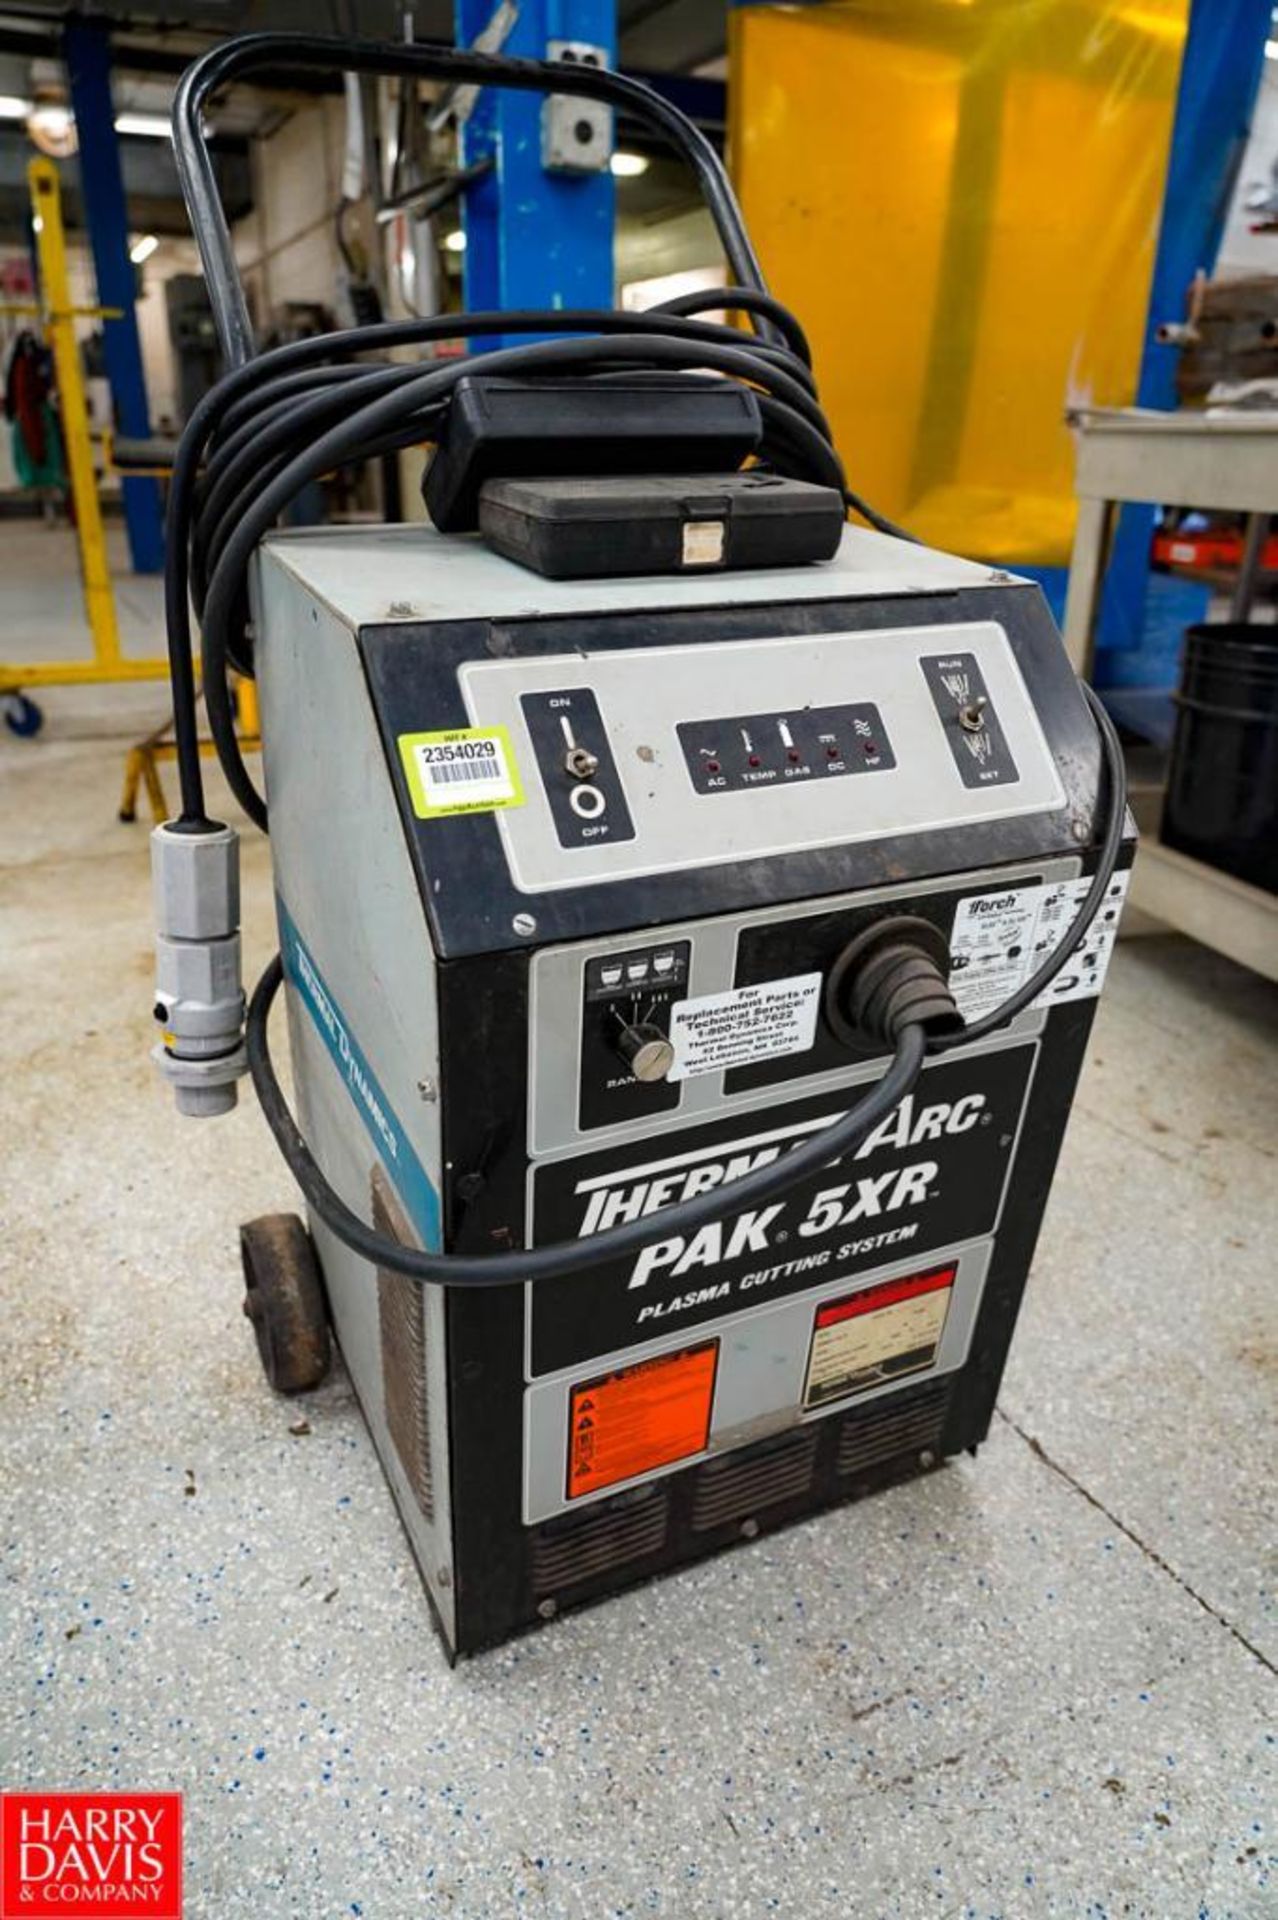 Thermal Dynamics Plasma Cutting System 460 Volts, 60 Hz, 20 Amps, 3 Phase, Secondary rated Current 5